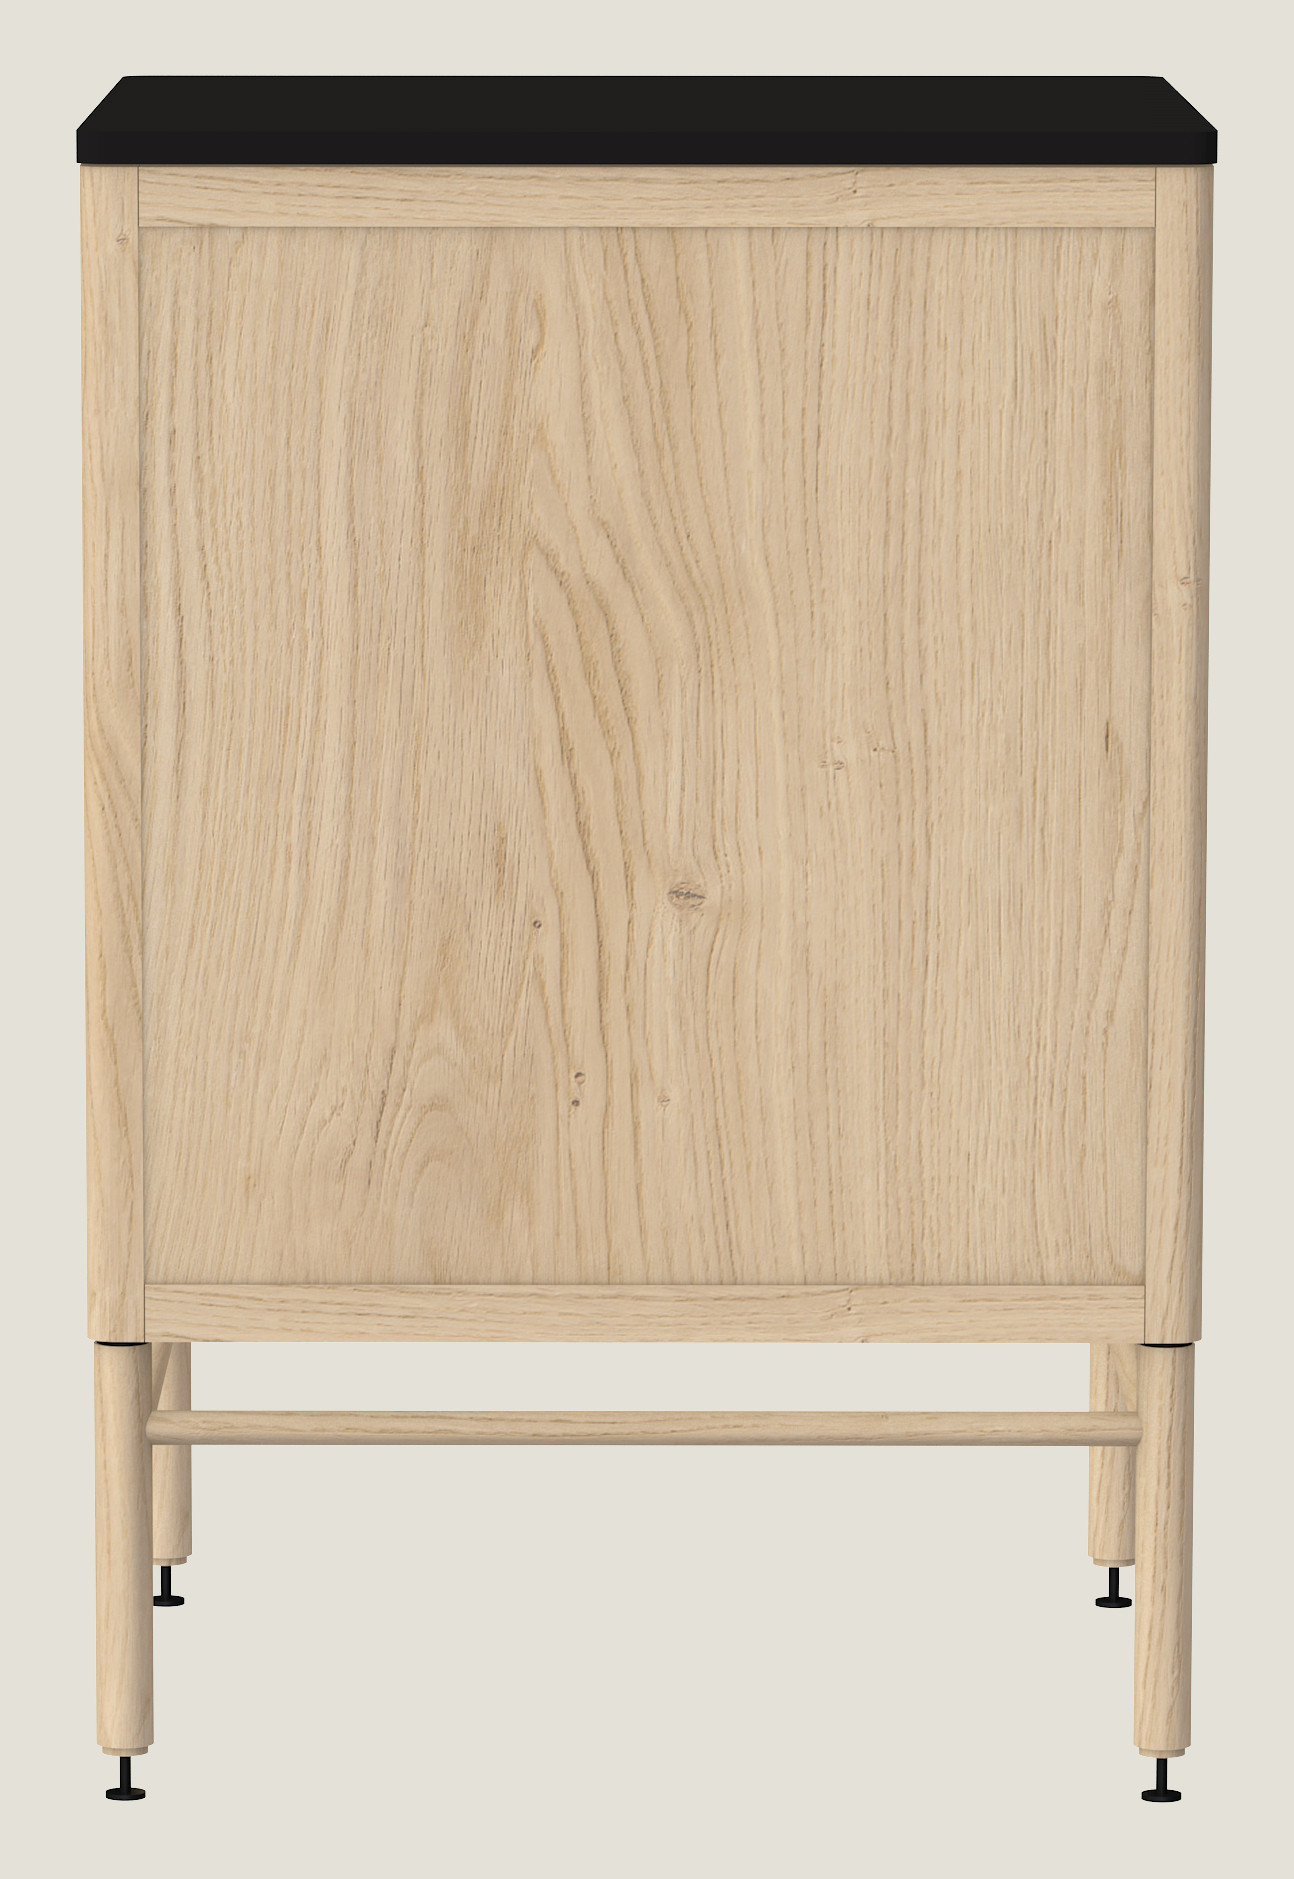 Coquo modular bathroom vanity with fix front and two doors in natural oak with metal handles.